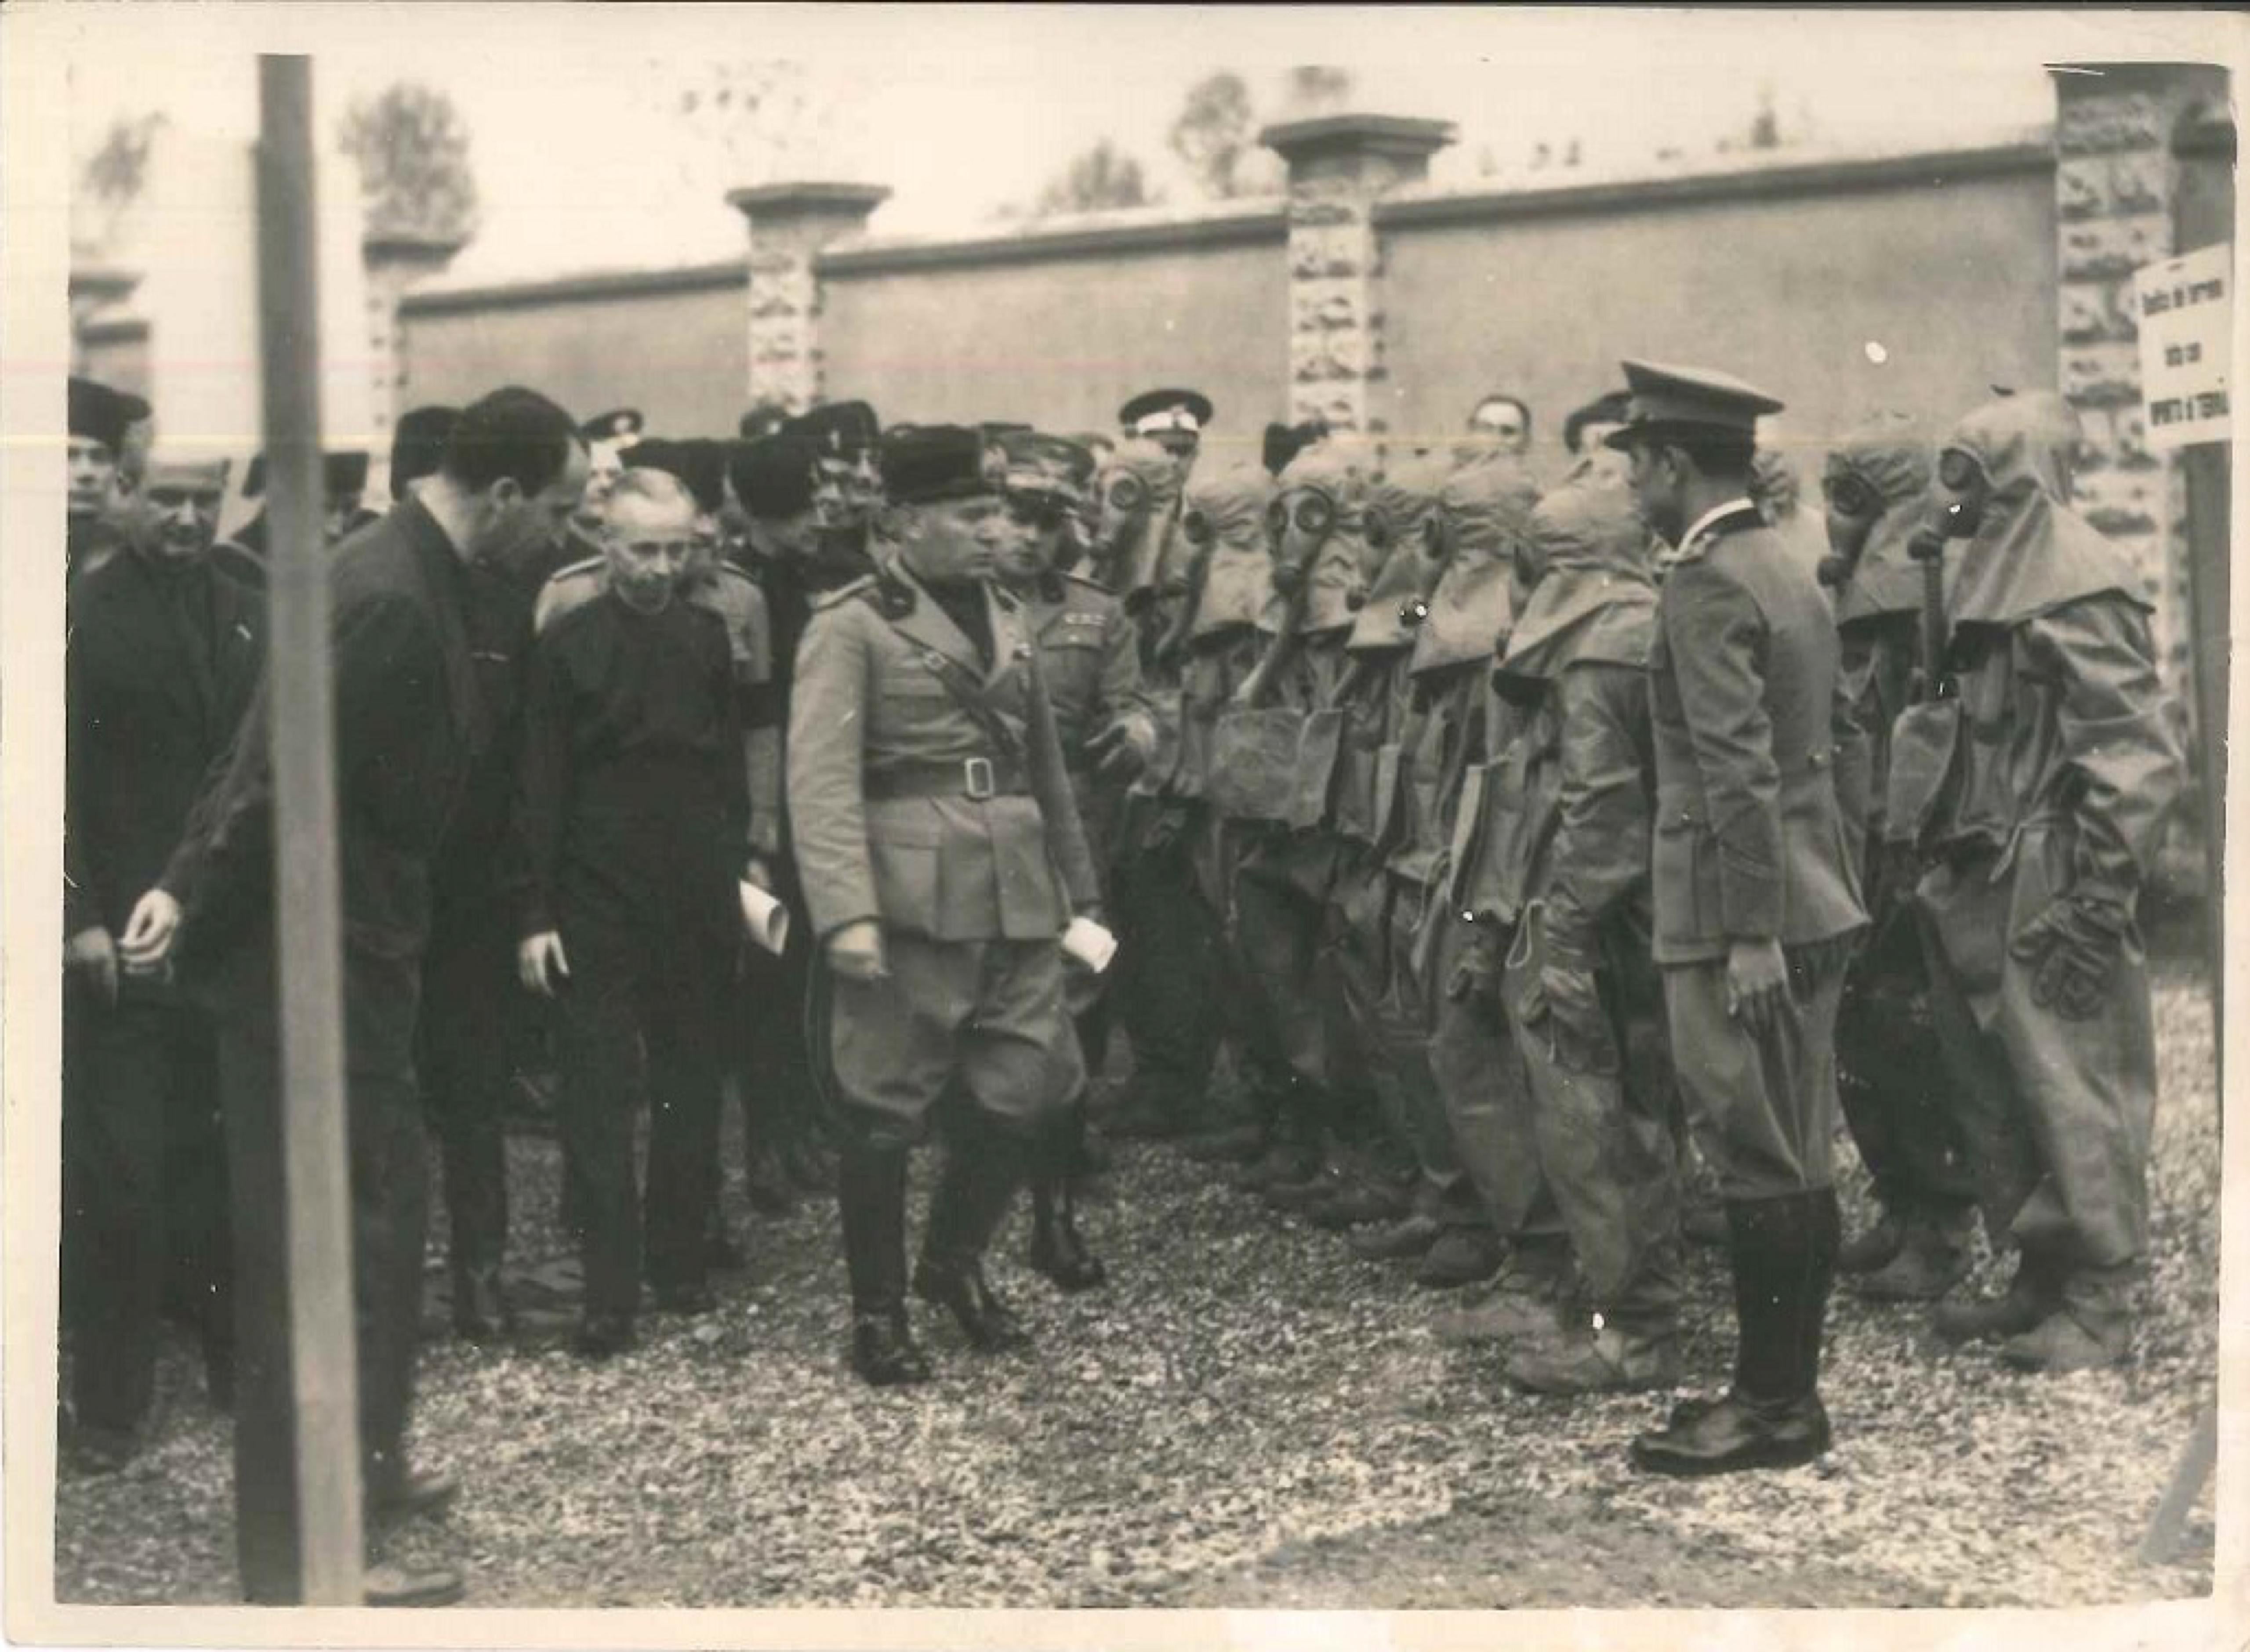 Unknown Figurative Photograph - The Visit of the Duce - Vintage Photo - 1930s